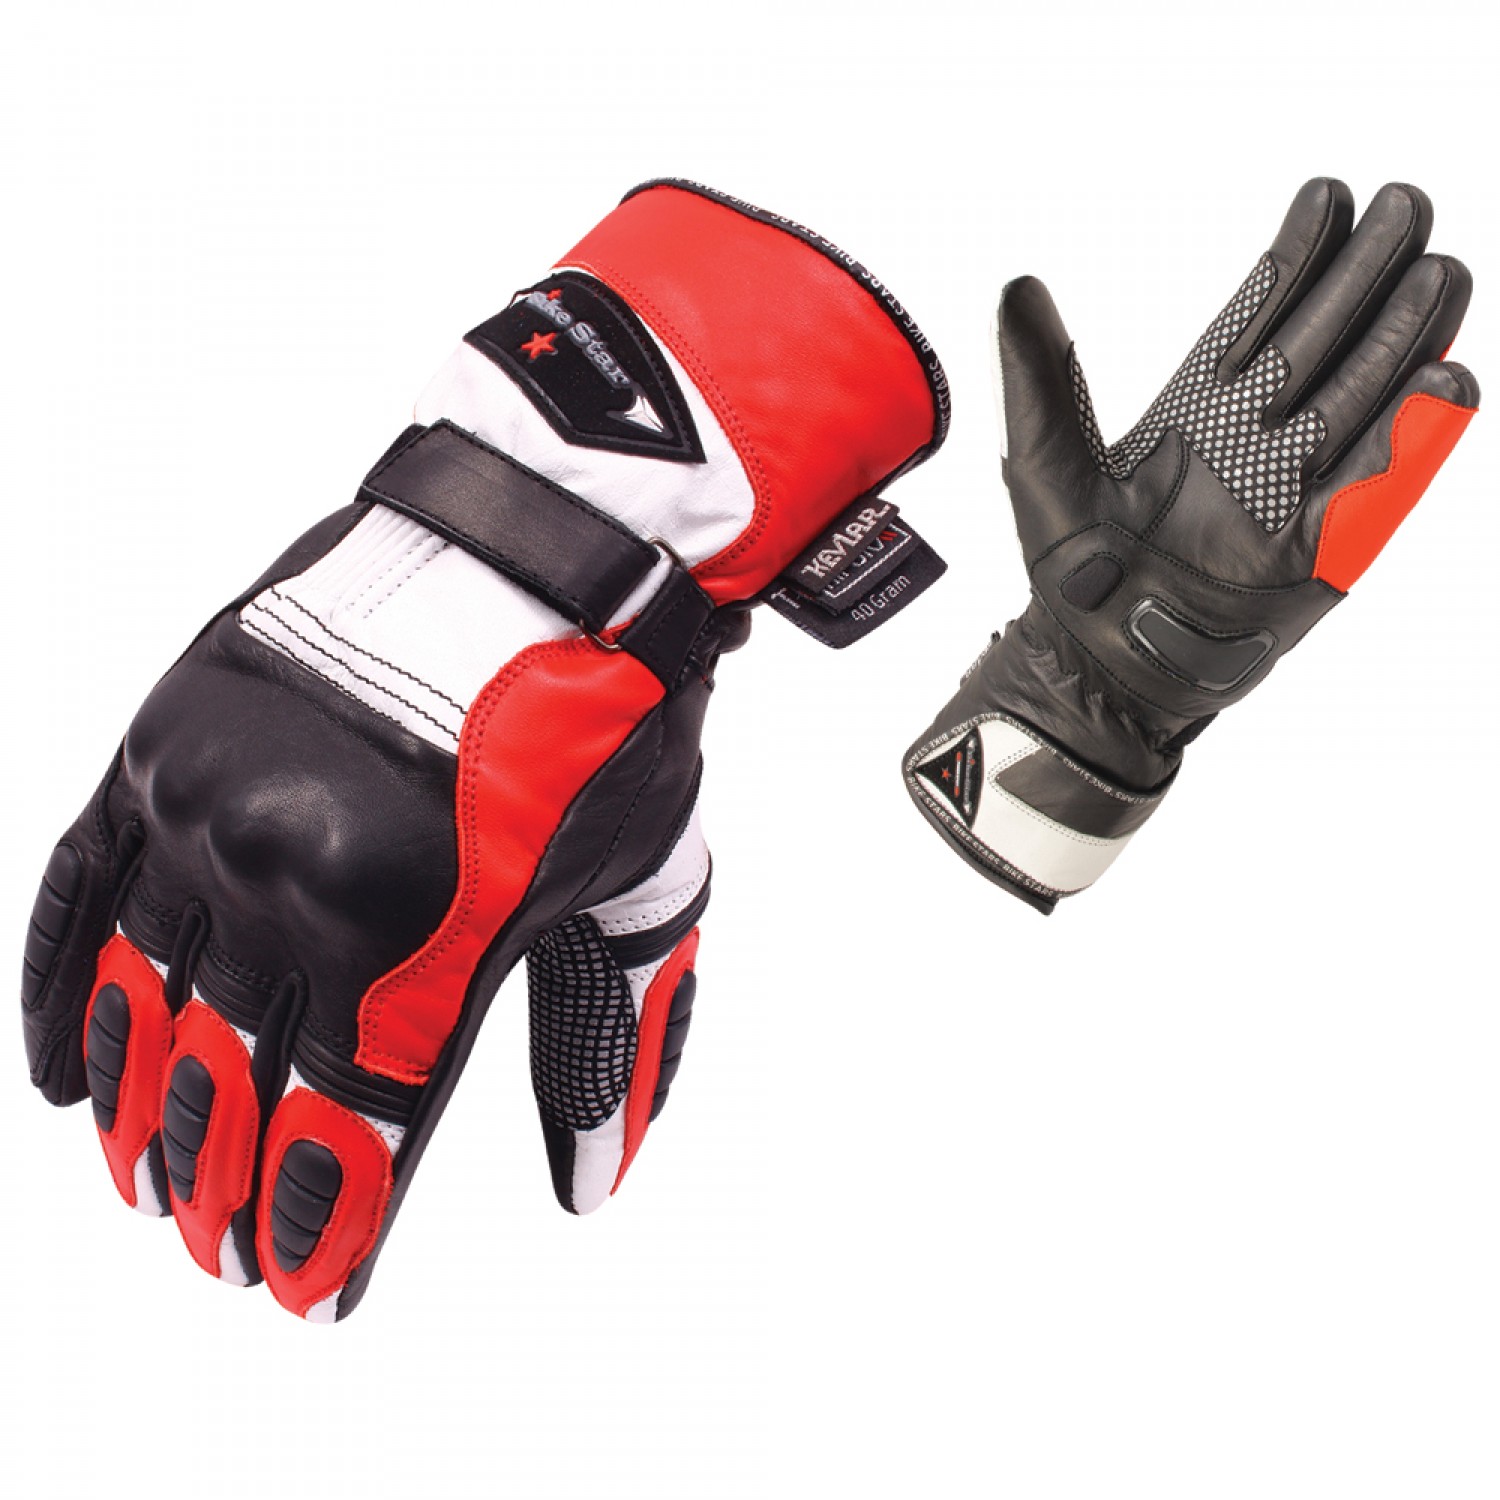 OFF TRACK WINTER LEATHER GLOVES